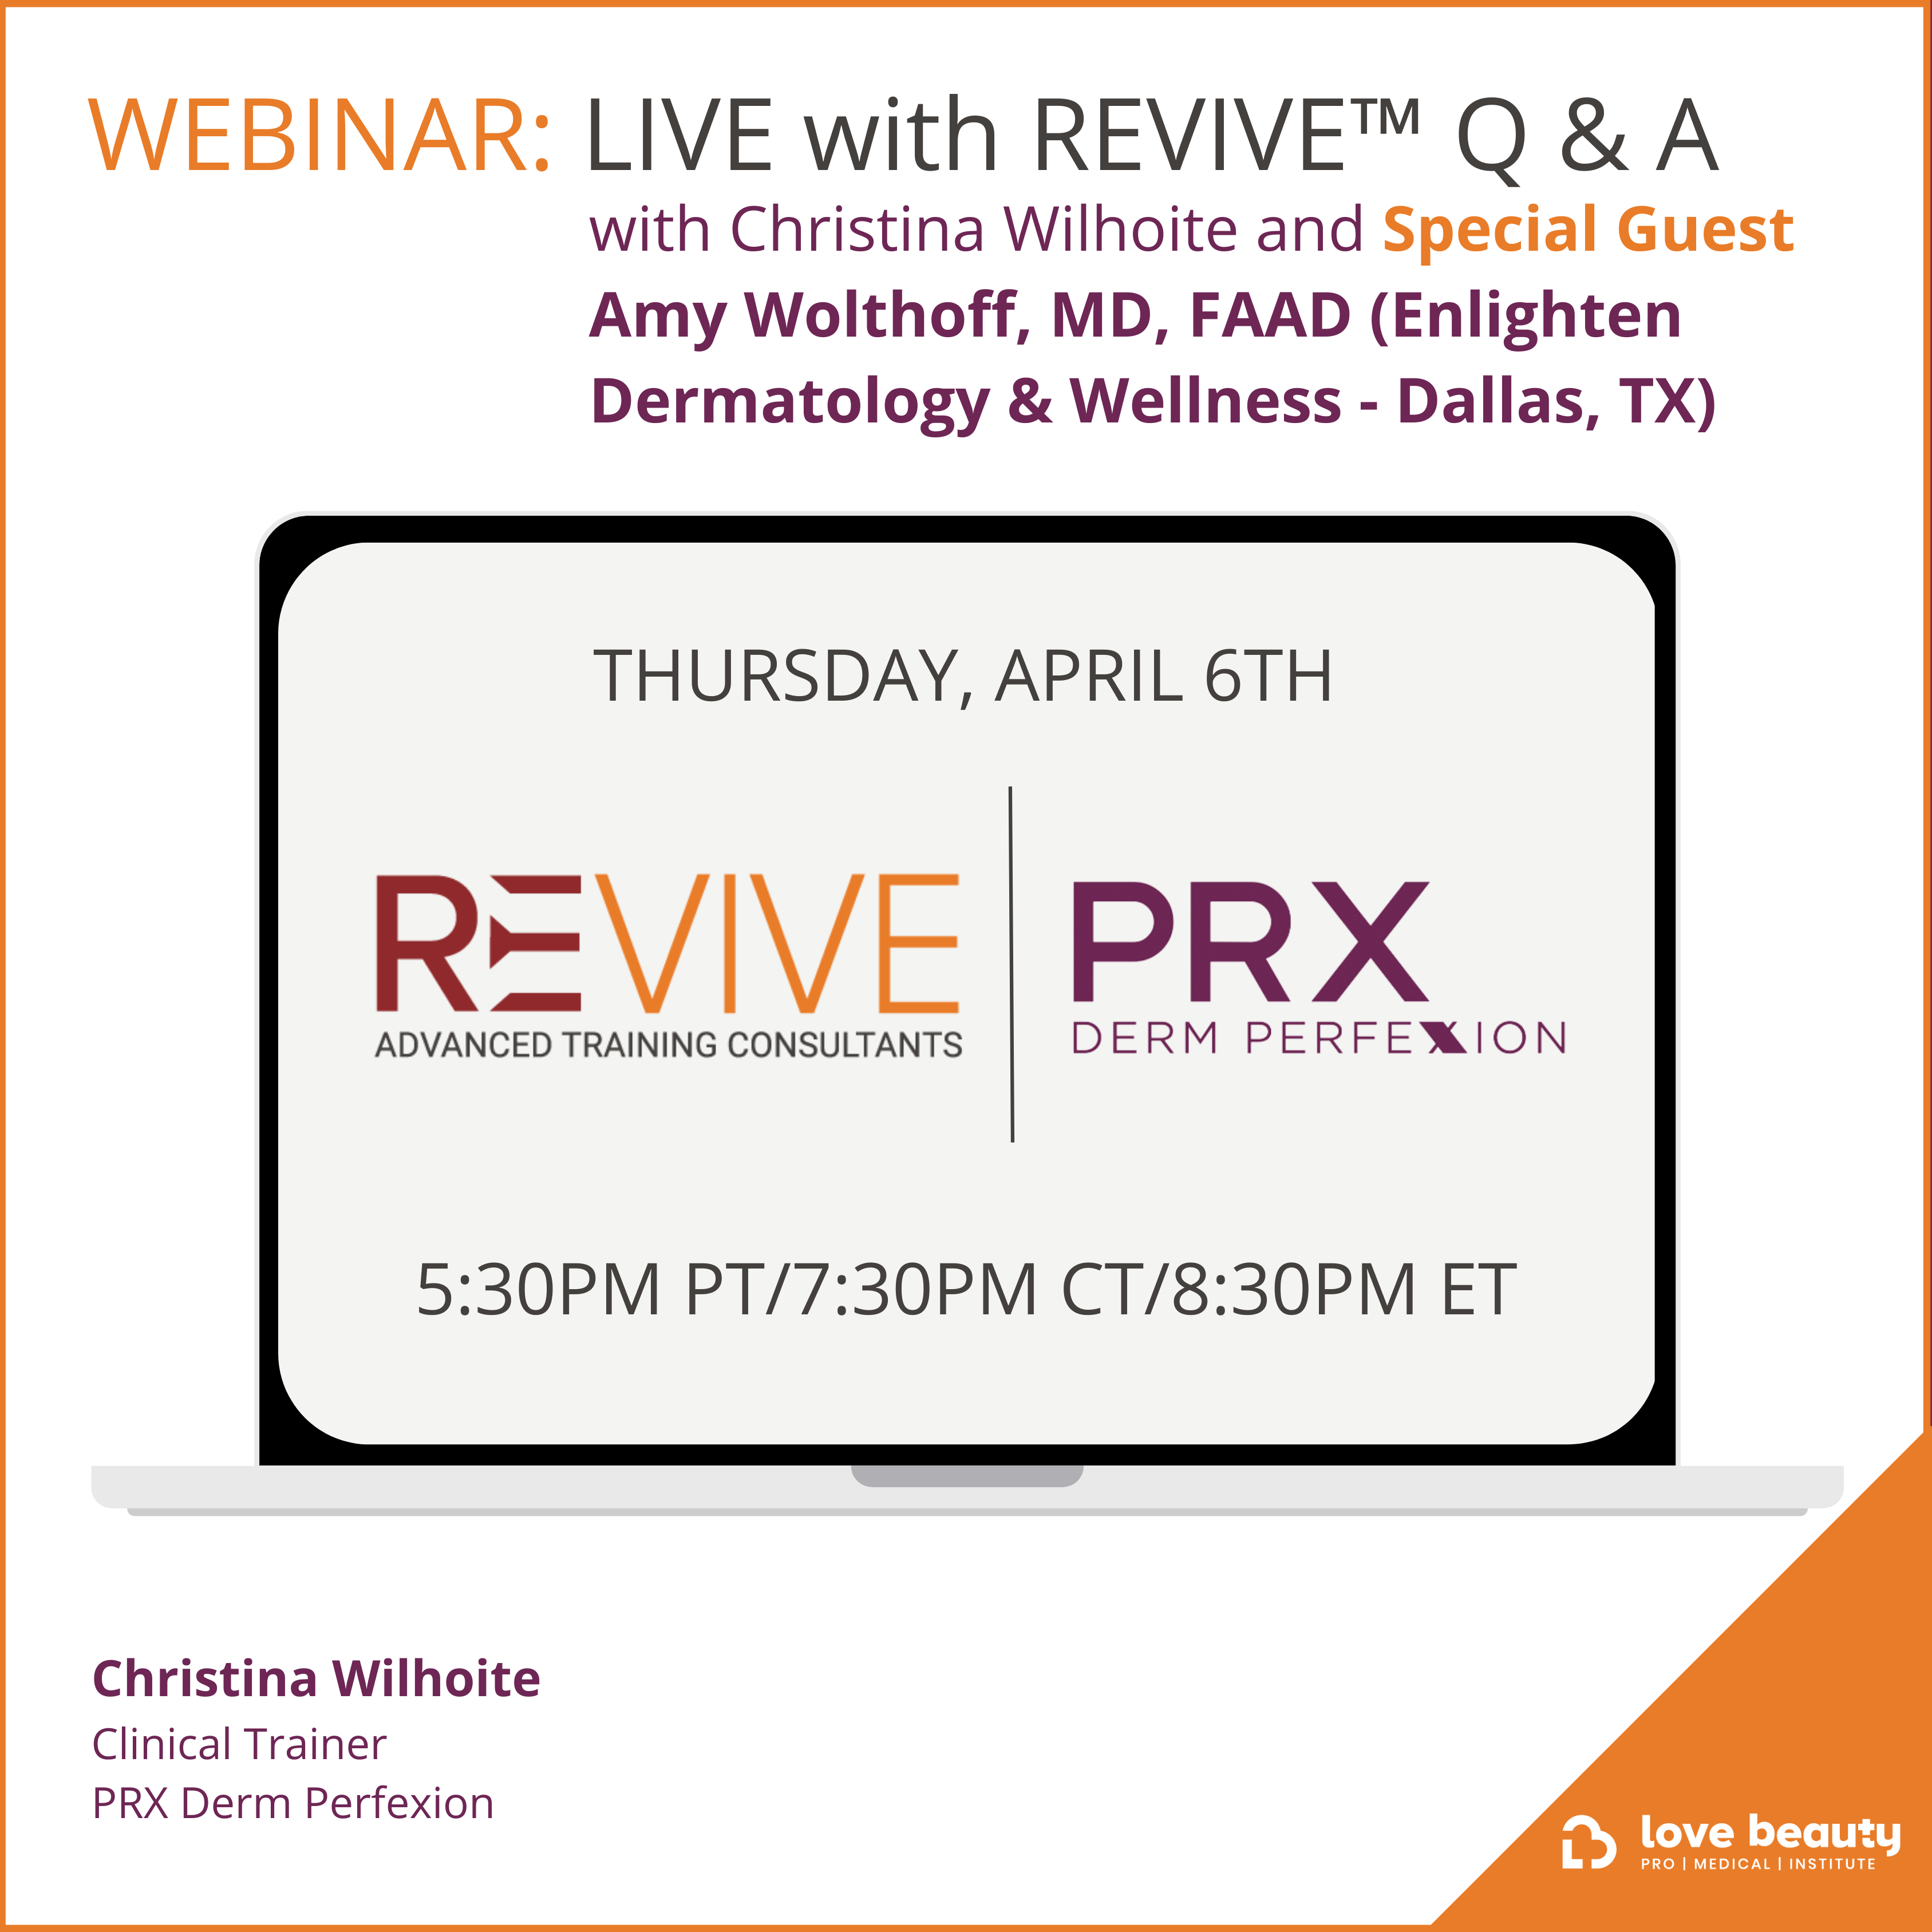 WEBINAR: LIVE with REVIVE™ Q & A with Christina Wilhoite and Special Guest Amy Wolthoff, MD, FAAD